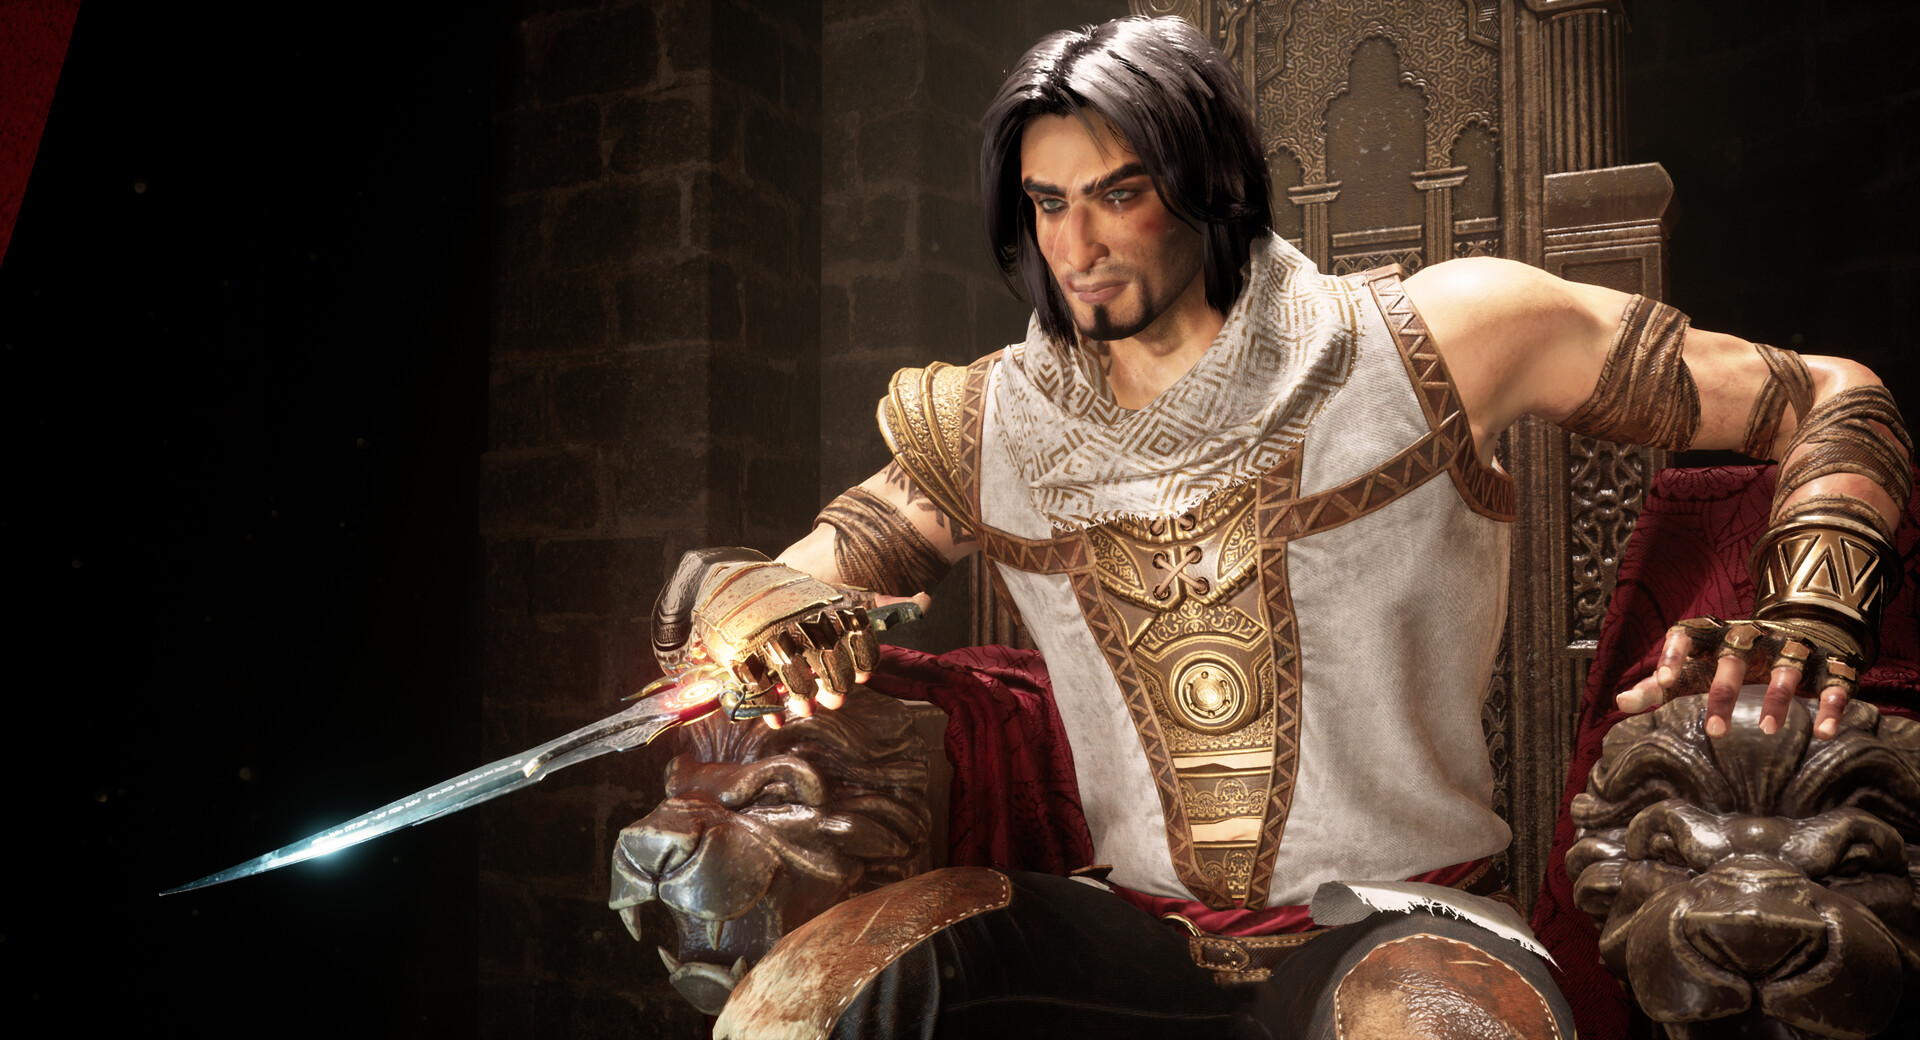 Prince of Persia - Two Thrones by UnSekReT on DeviantArt